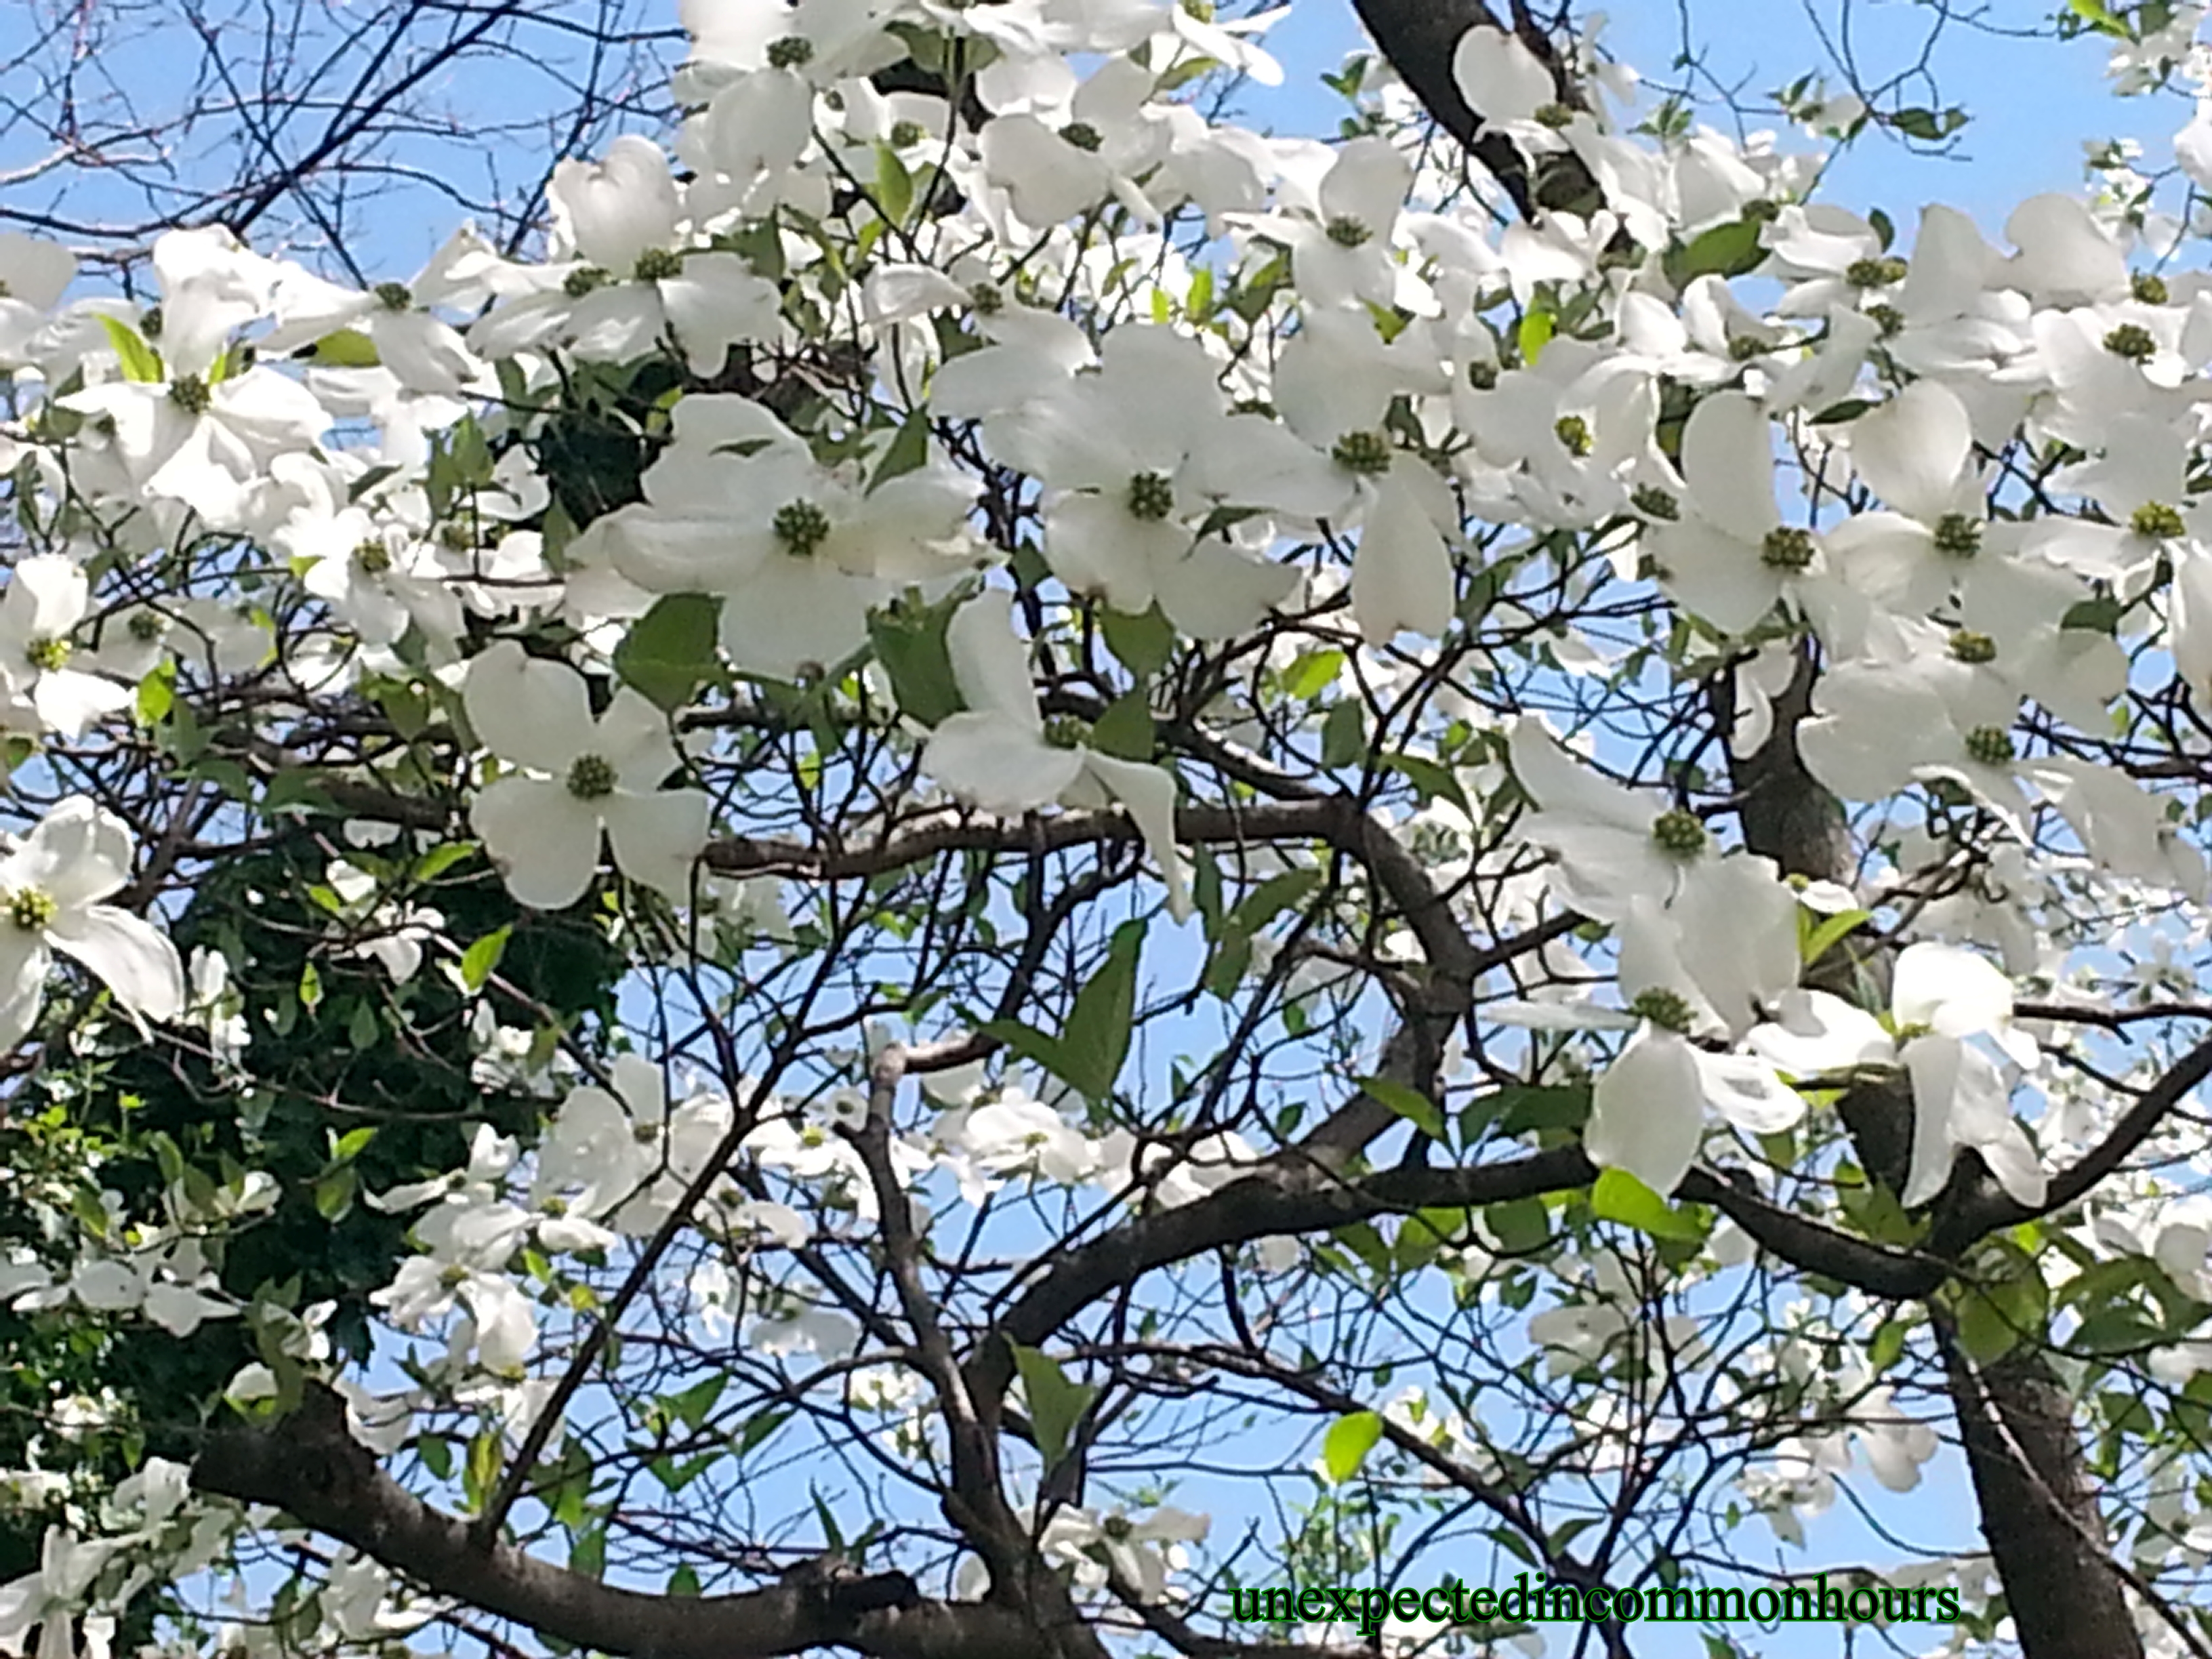 Phoneography: Dogwood in Bloom – Unexpected in common hours